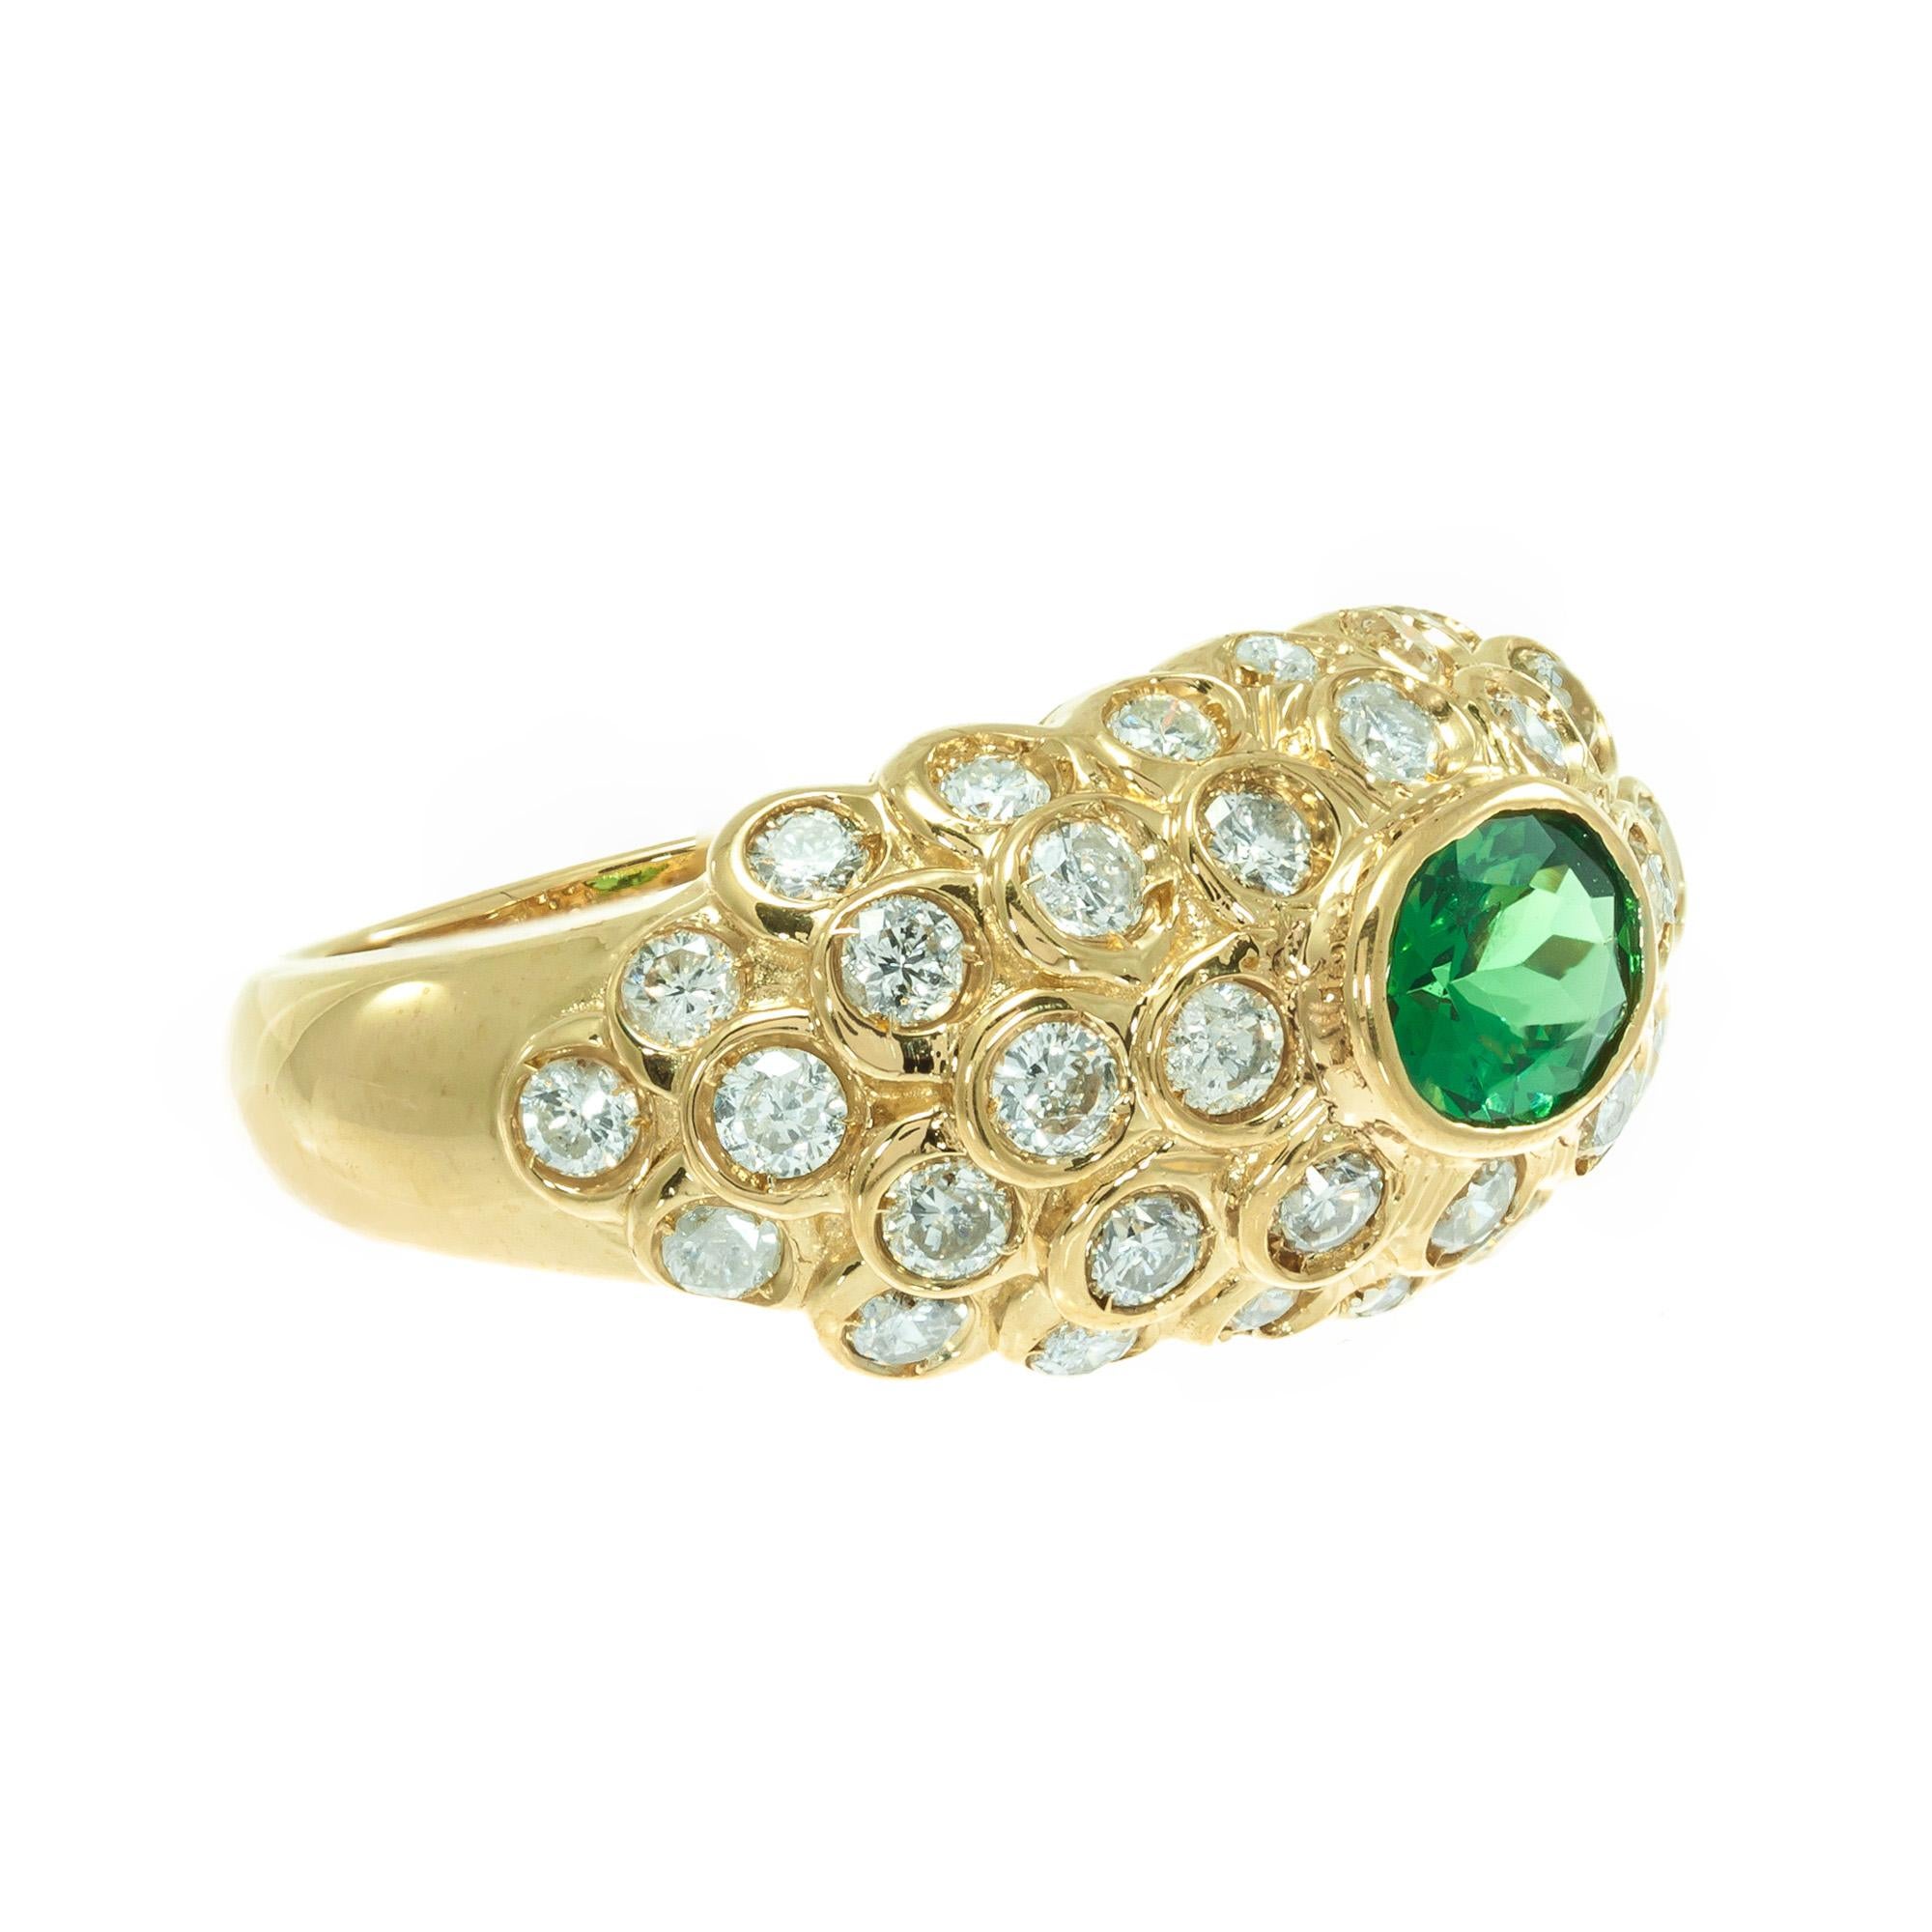 Green tsavorite garnet and diamond cluster cocktail ring. 14k yellow gold dome setting with oval green tsavorite center stone surrounded by a cluster of round diamonds. 

1 oval green SI tsavorite garnet, Approximate 1.17ct GIA Certificate #